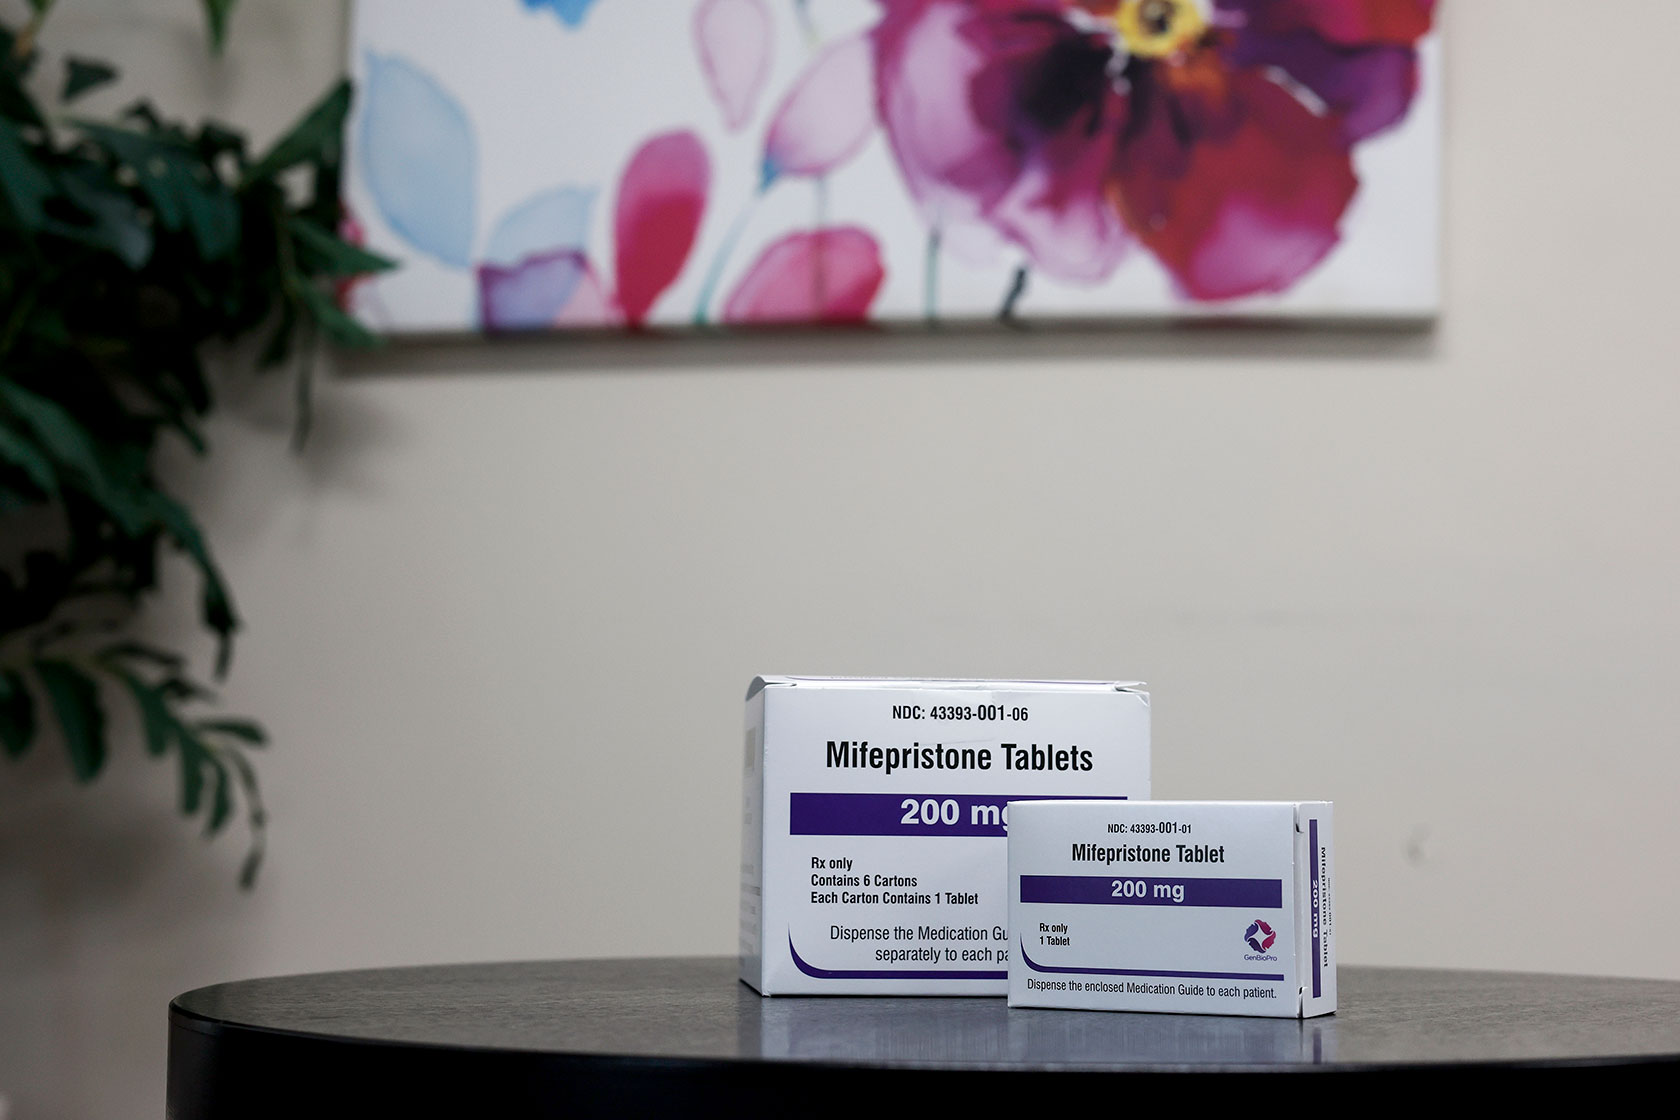 Packages of mifepristone are displayed at a family planning clinic.